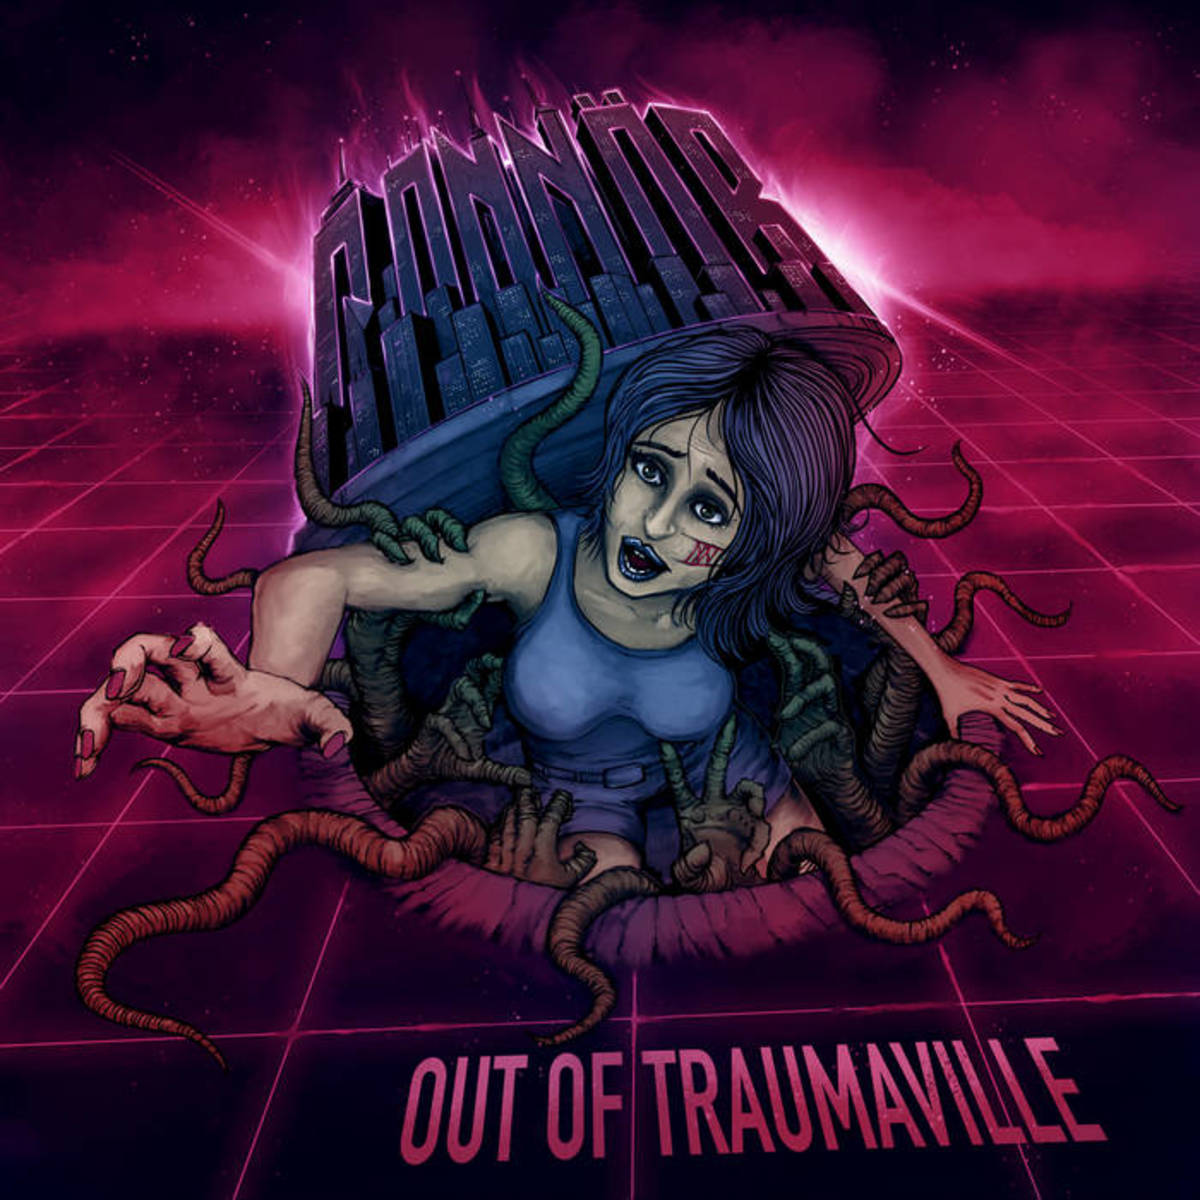 "Out of Traumaville"